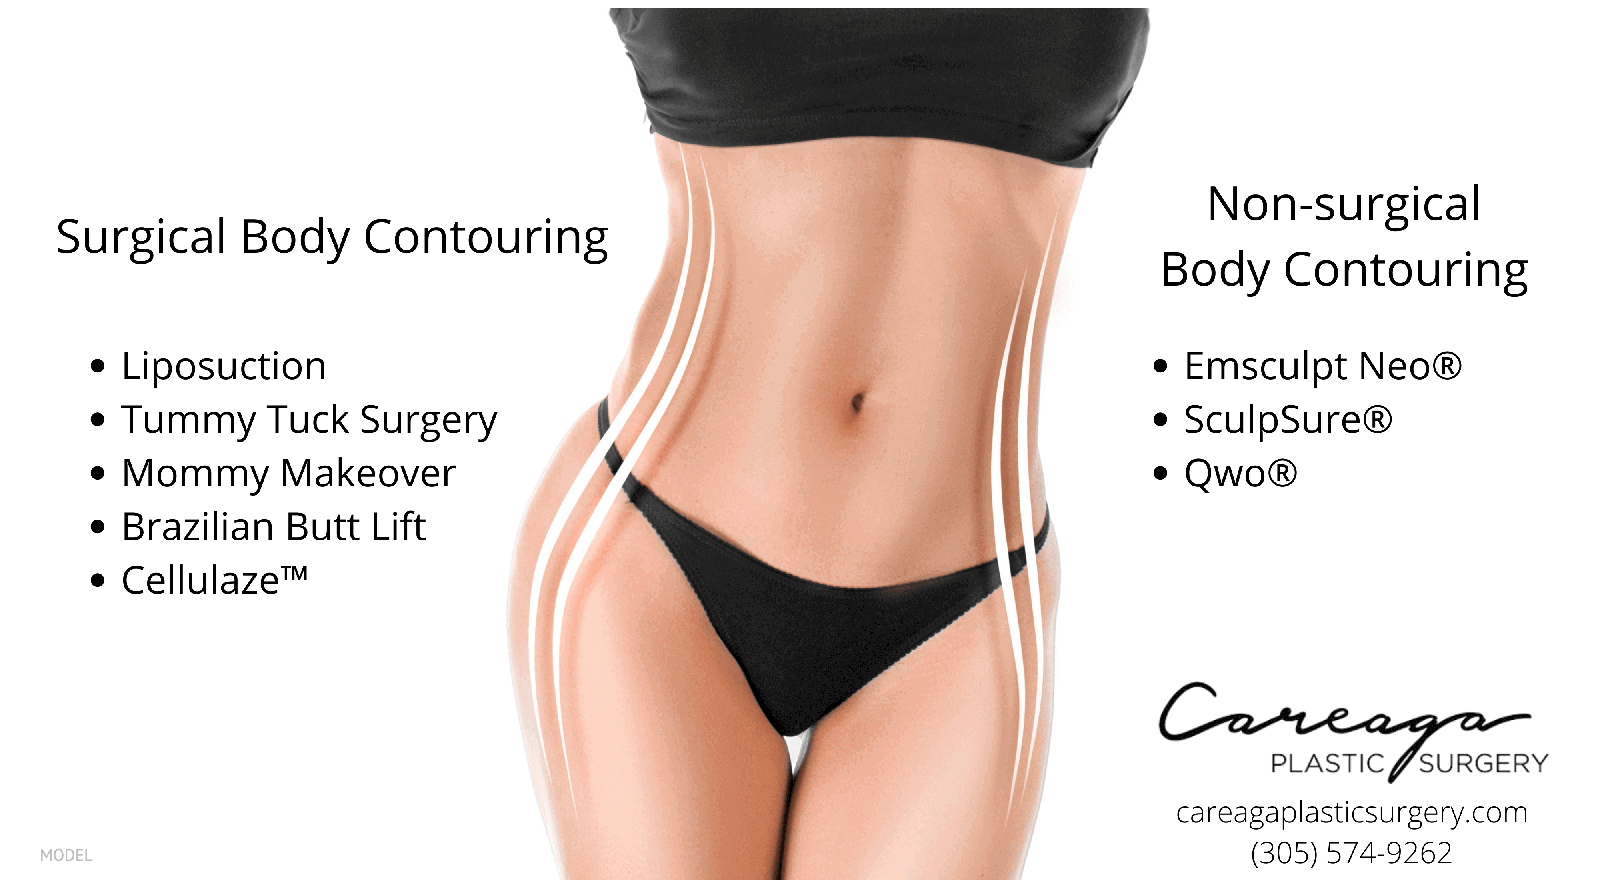 Will Body Contouring Be the “It” Procedure in 2021?